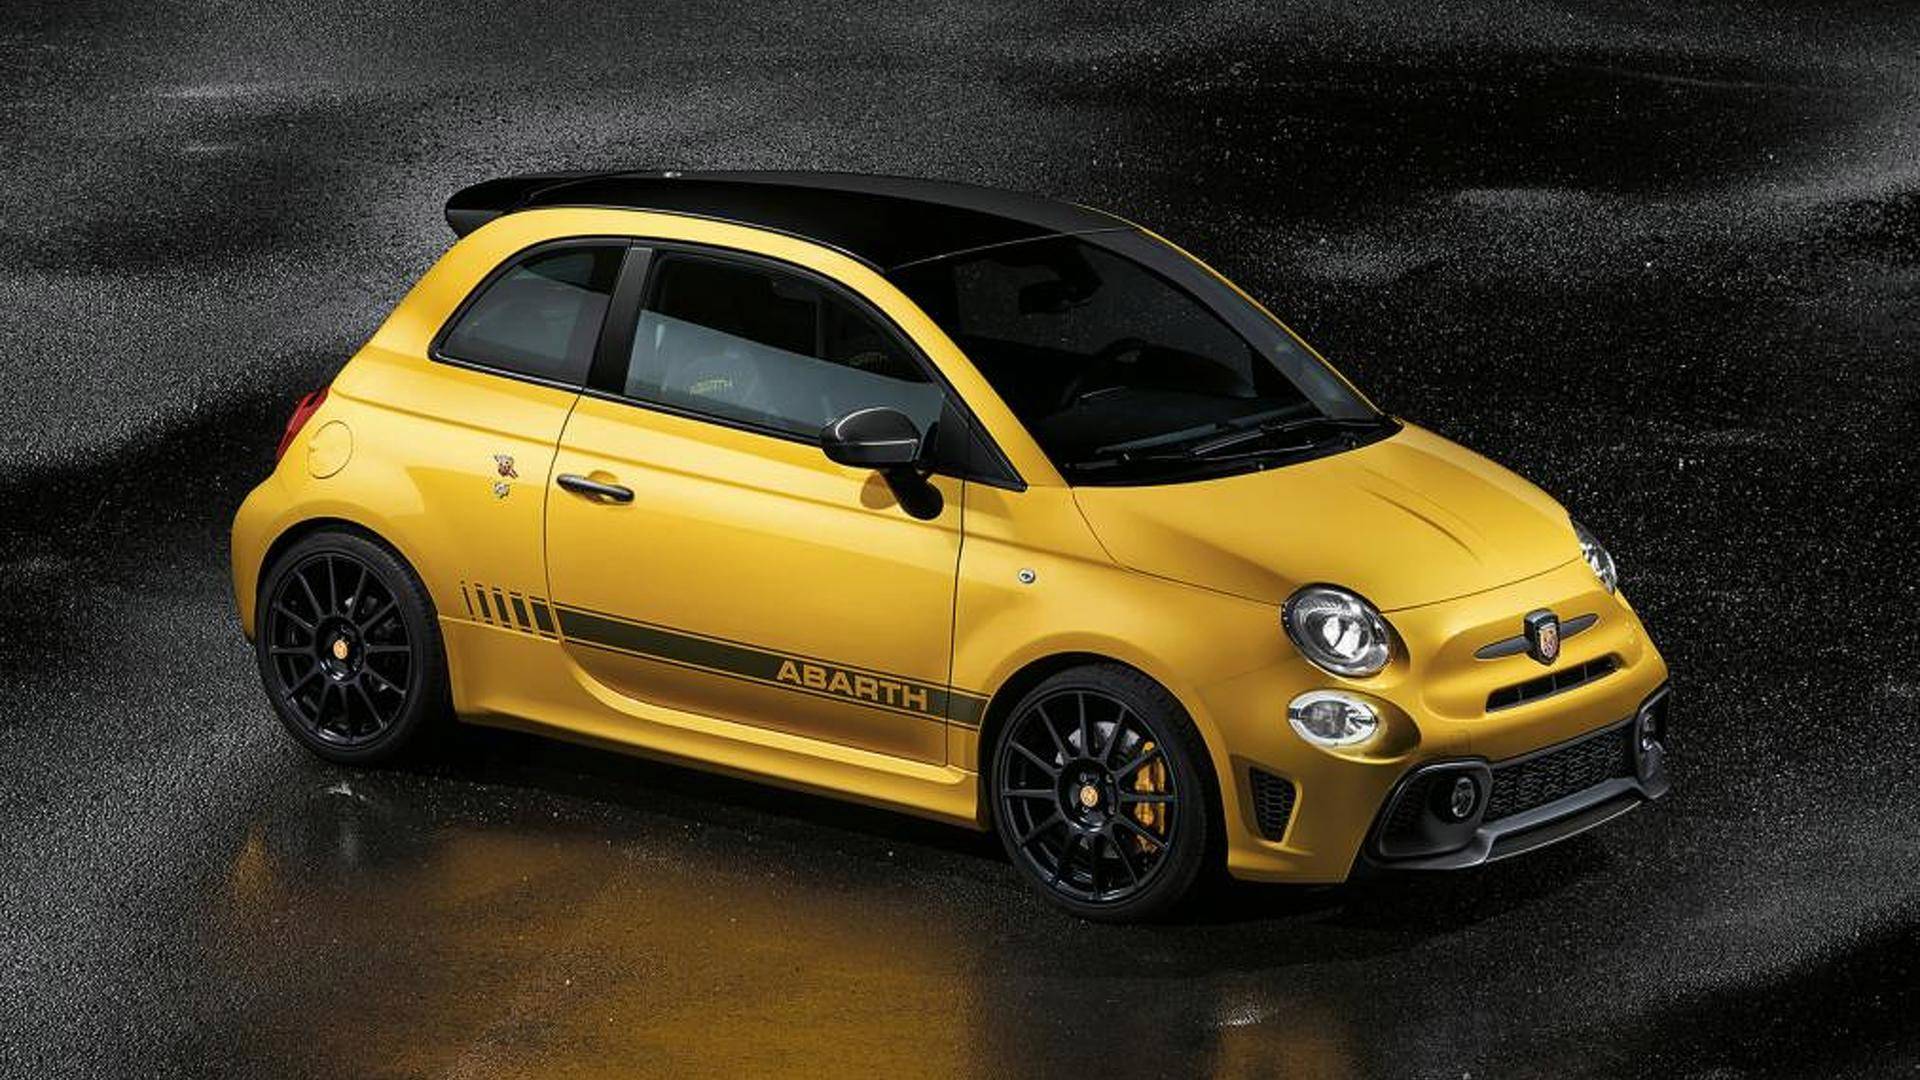 Abarth S Fiat Based Pocket Rocket Is Updated For